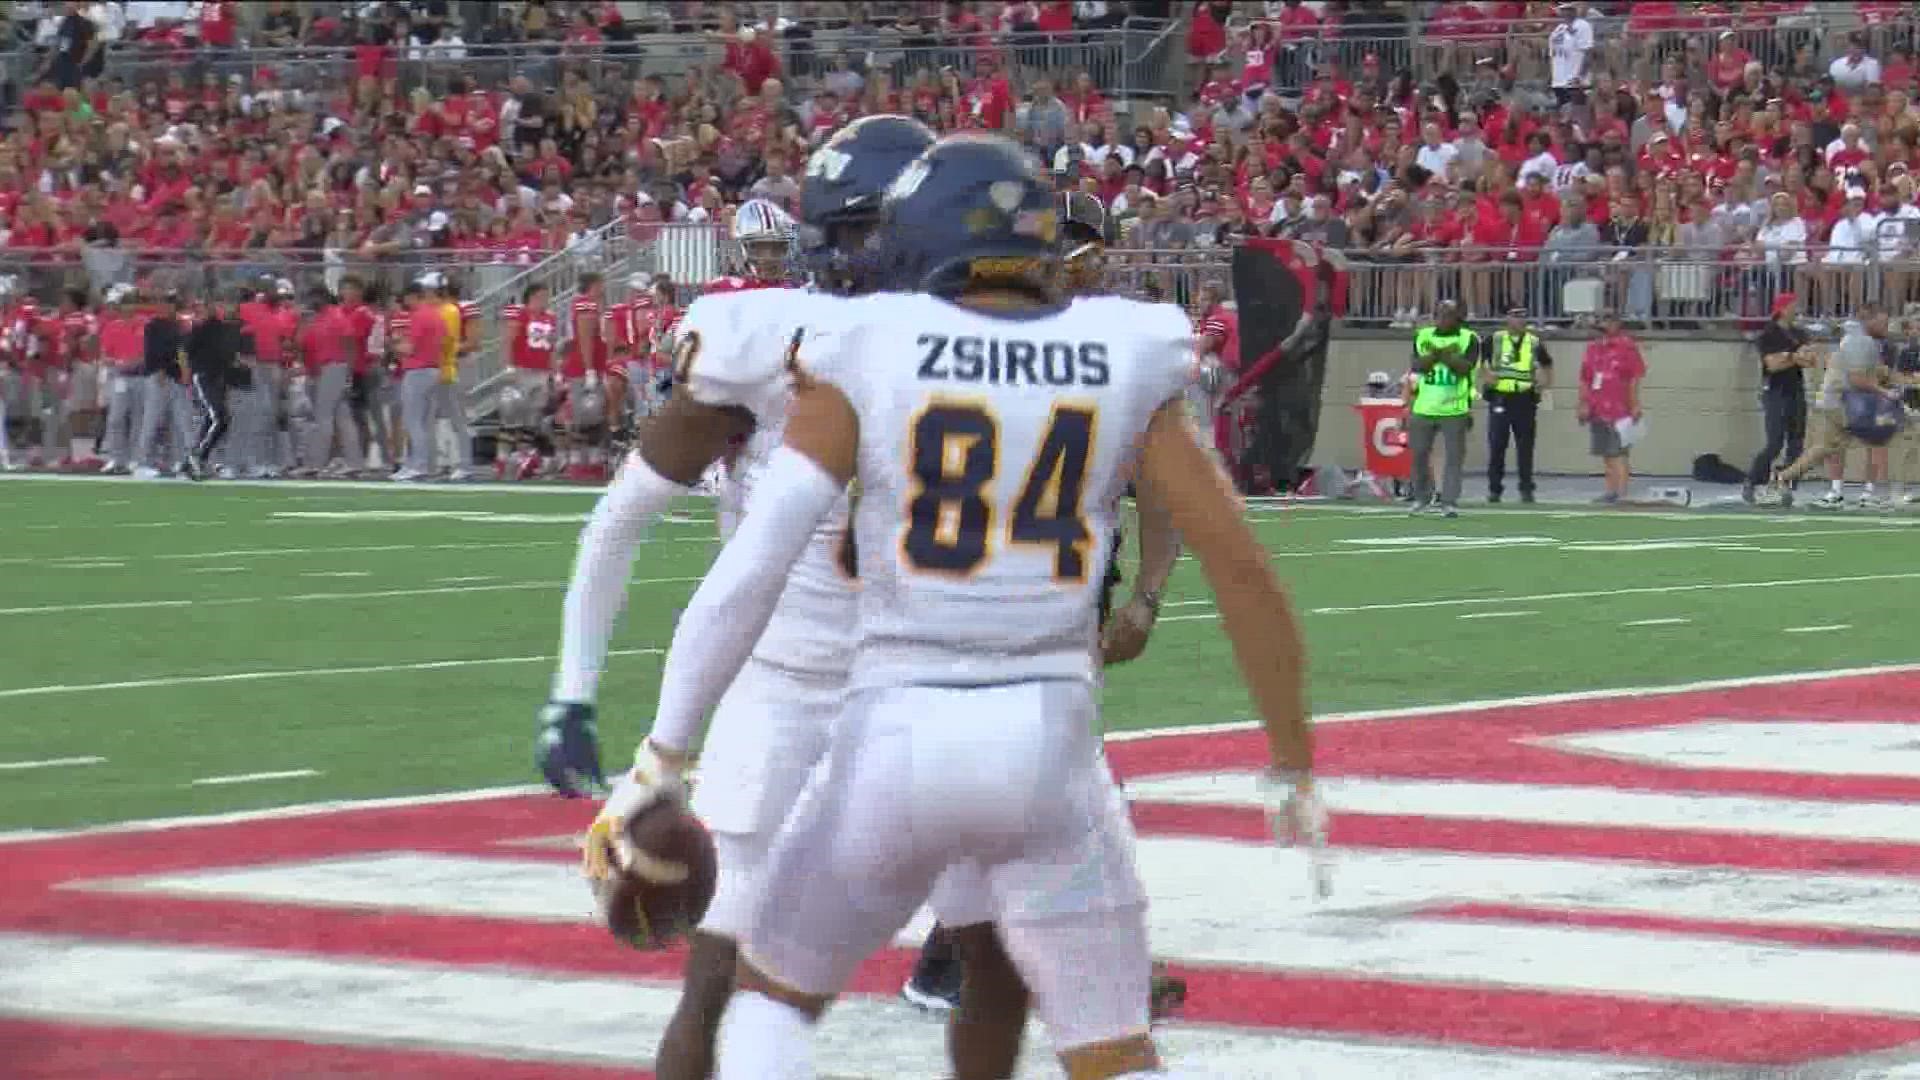 St. John's grad Thomas Zsiros caught a 50 yard touchdown pass in the first quarter against the Buckeyes on Saturday.